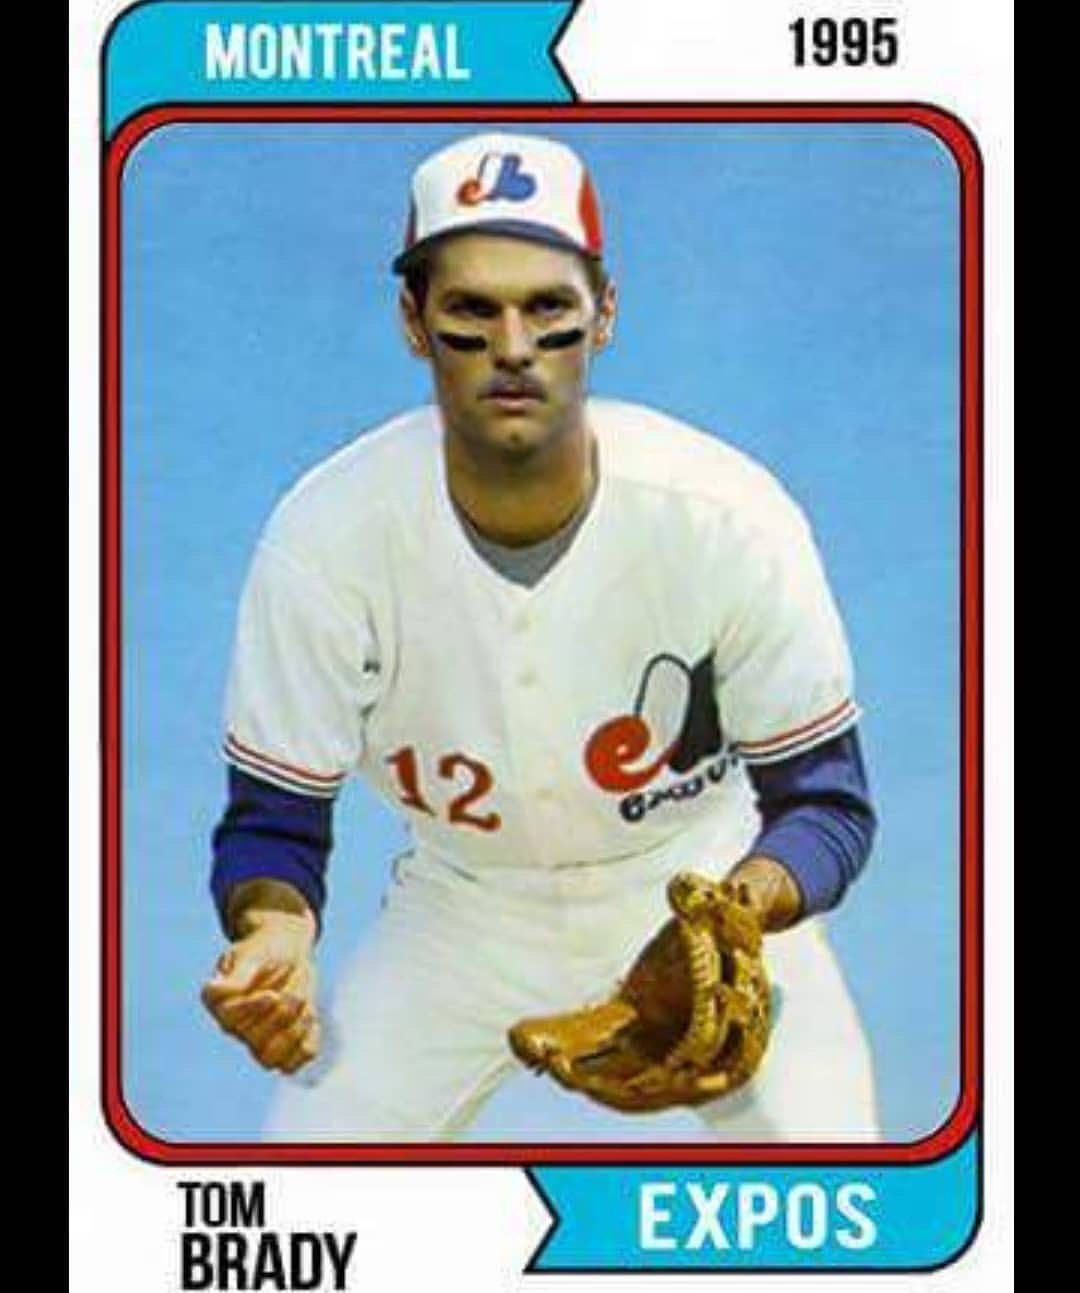 brady drafted by expos